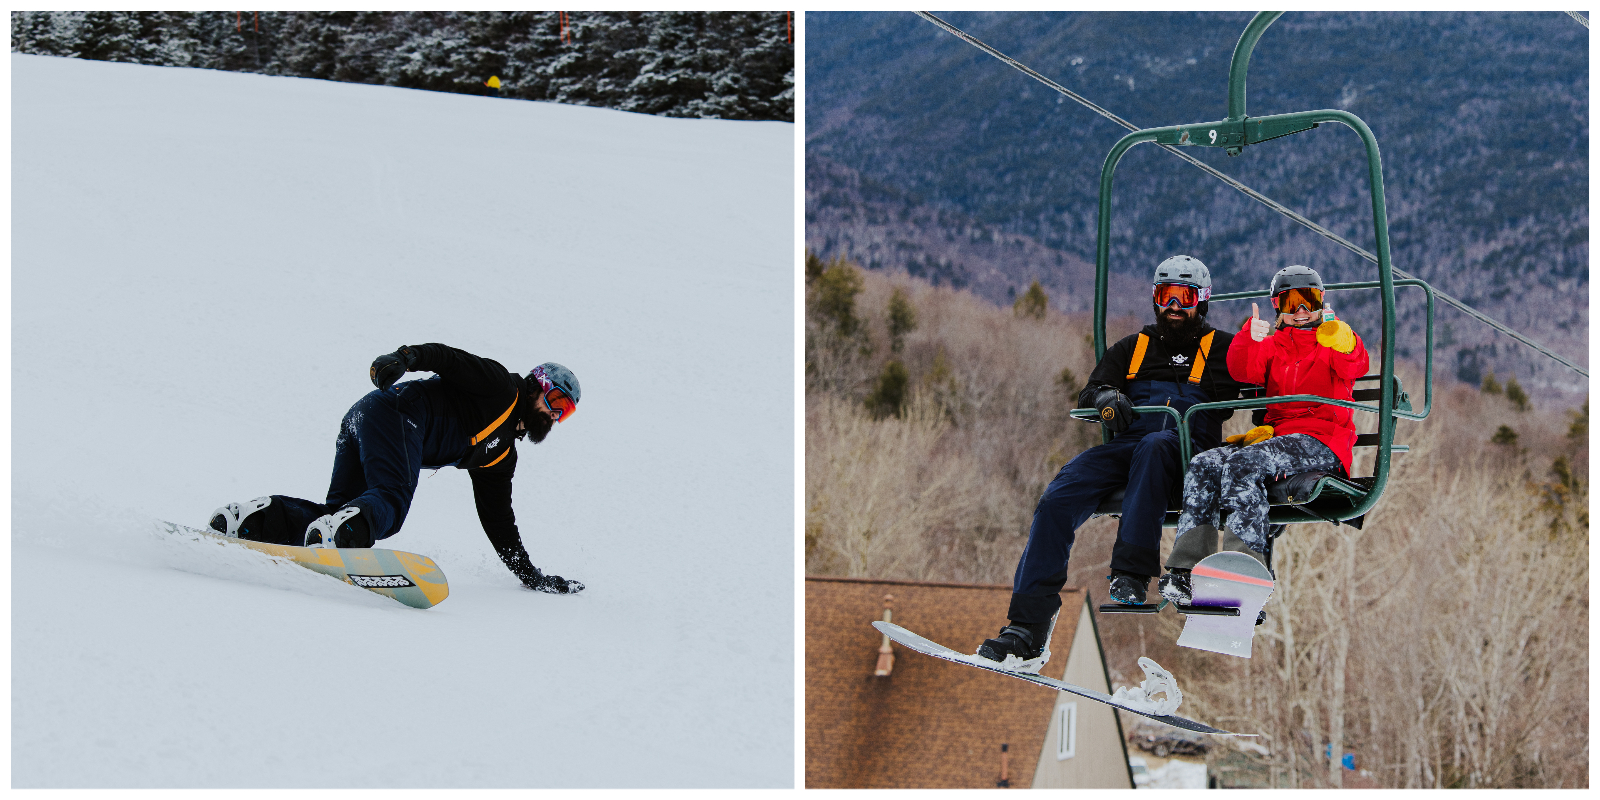 TSM, The Ski Monster, skiing, snowboarding, skis, snowboards, gear test, ski test, winter, snow, Waterville Valley, New Hampshire